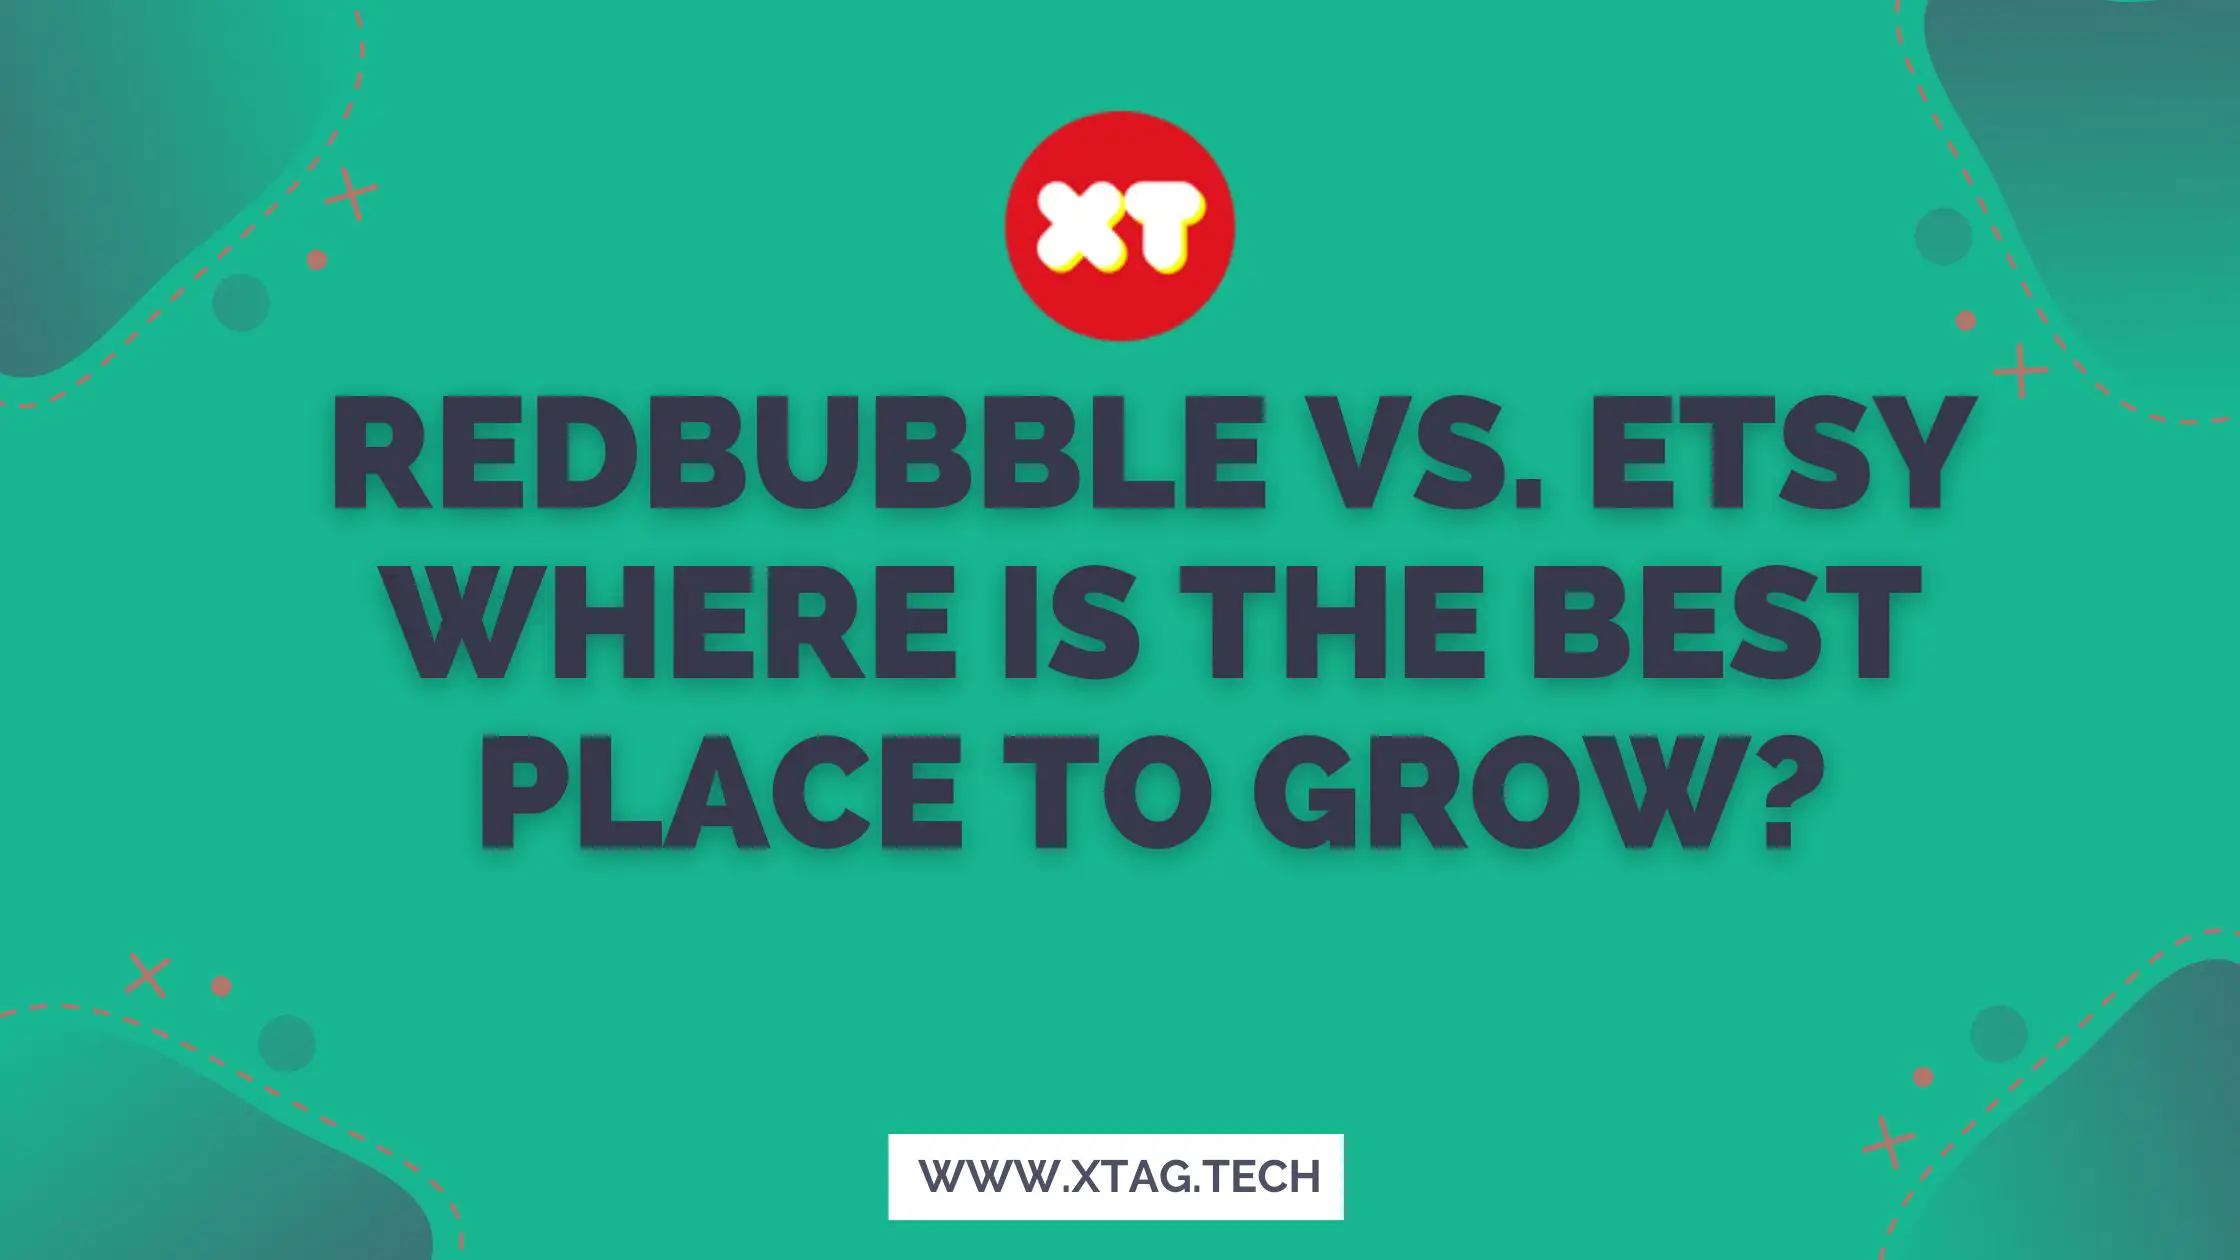 Redbubble Vs. Etsy Where Is The Best Place To Grow?